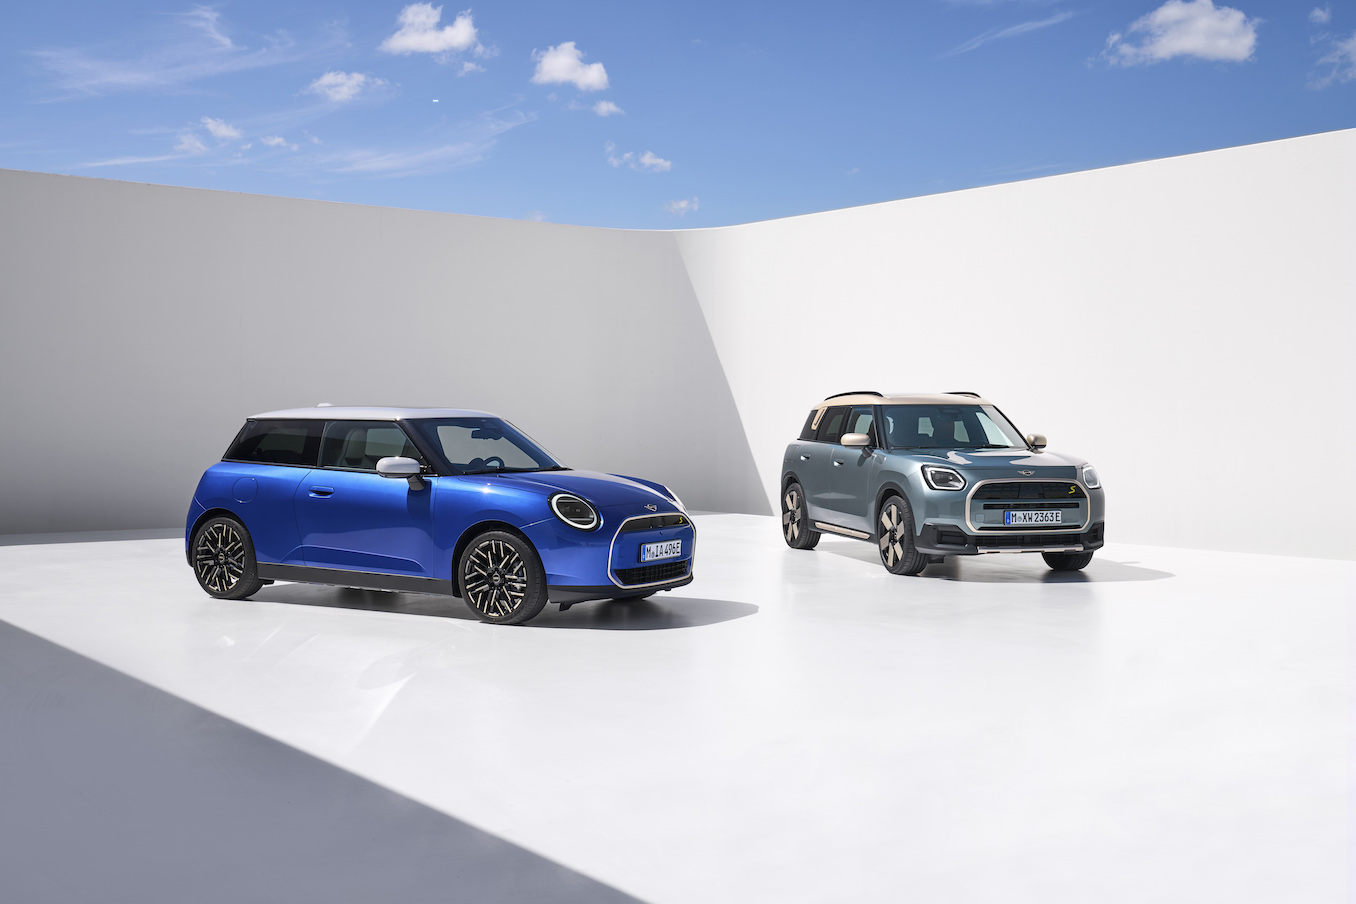 Two blue Mini Cooper models parked against a white backdrop and blue sky. This is the most dependable sports car in 2023.